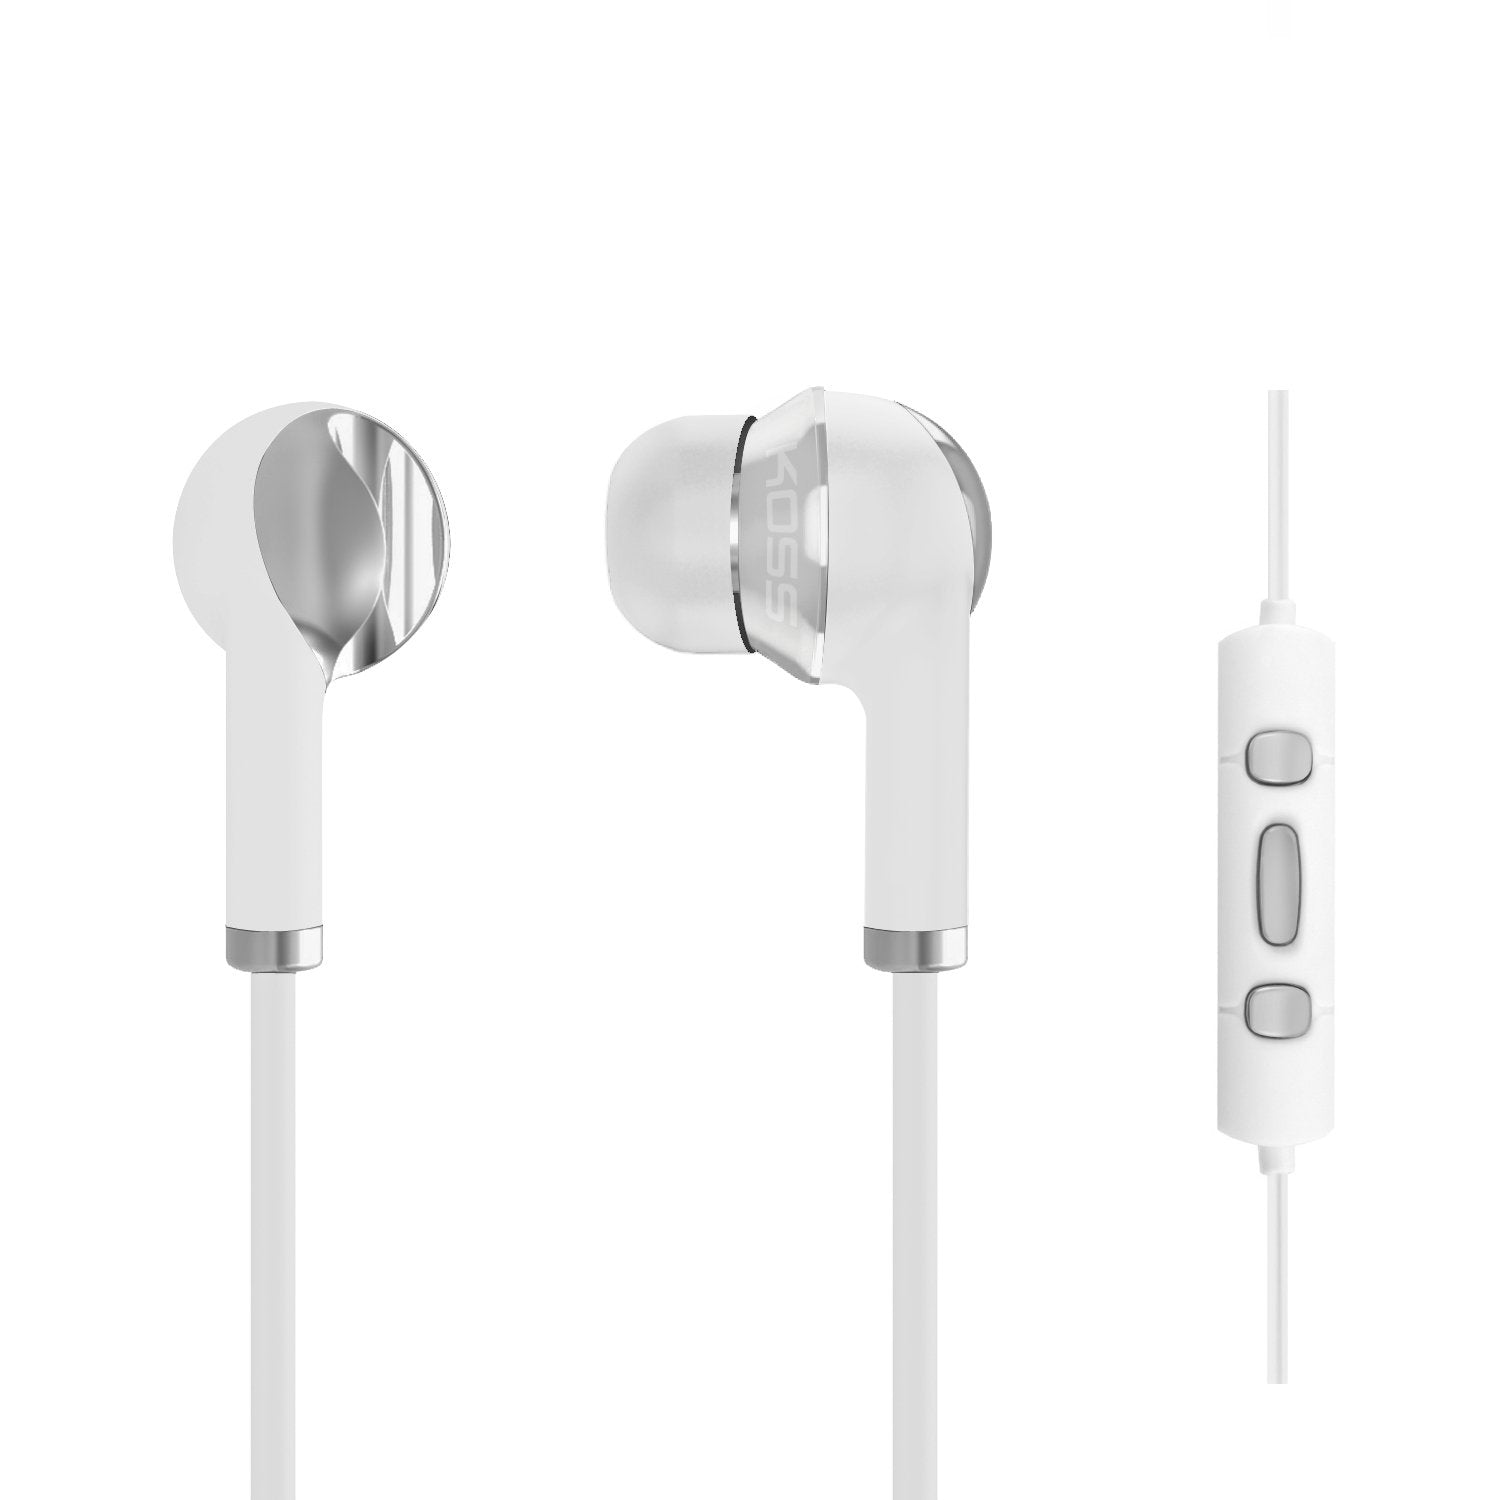 Koss iL200w KTC Aluminum Ear Buds with In-Line Controls for iPhone/iPad/iPod, White